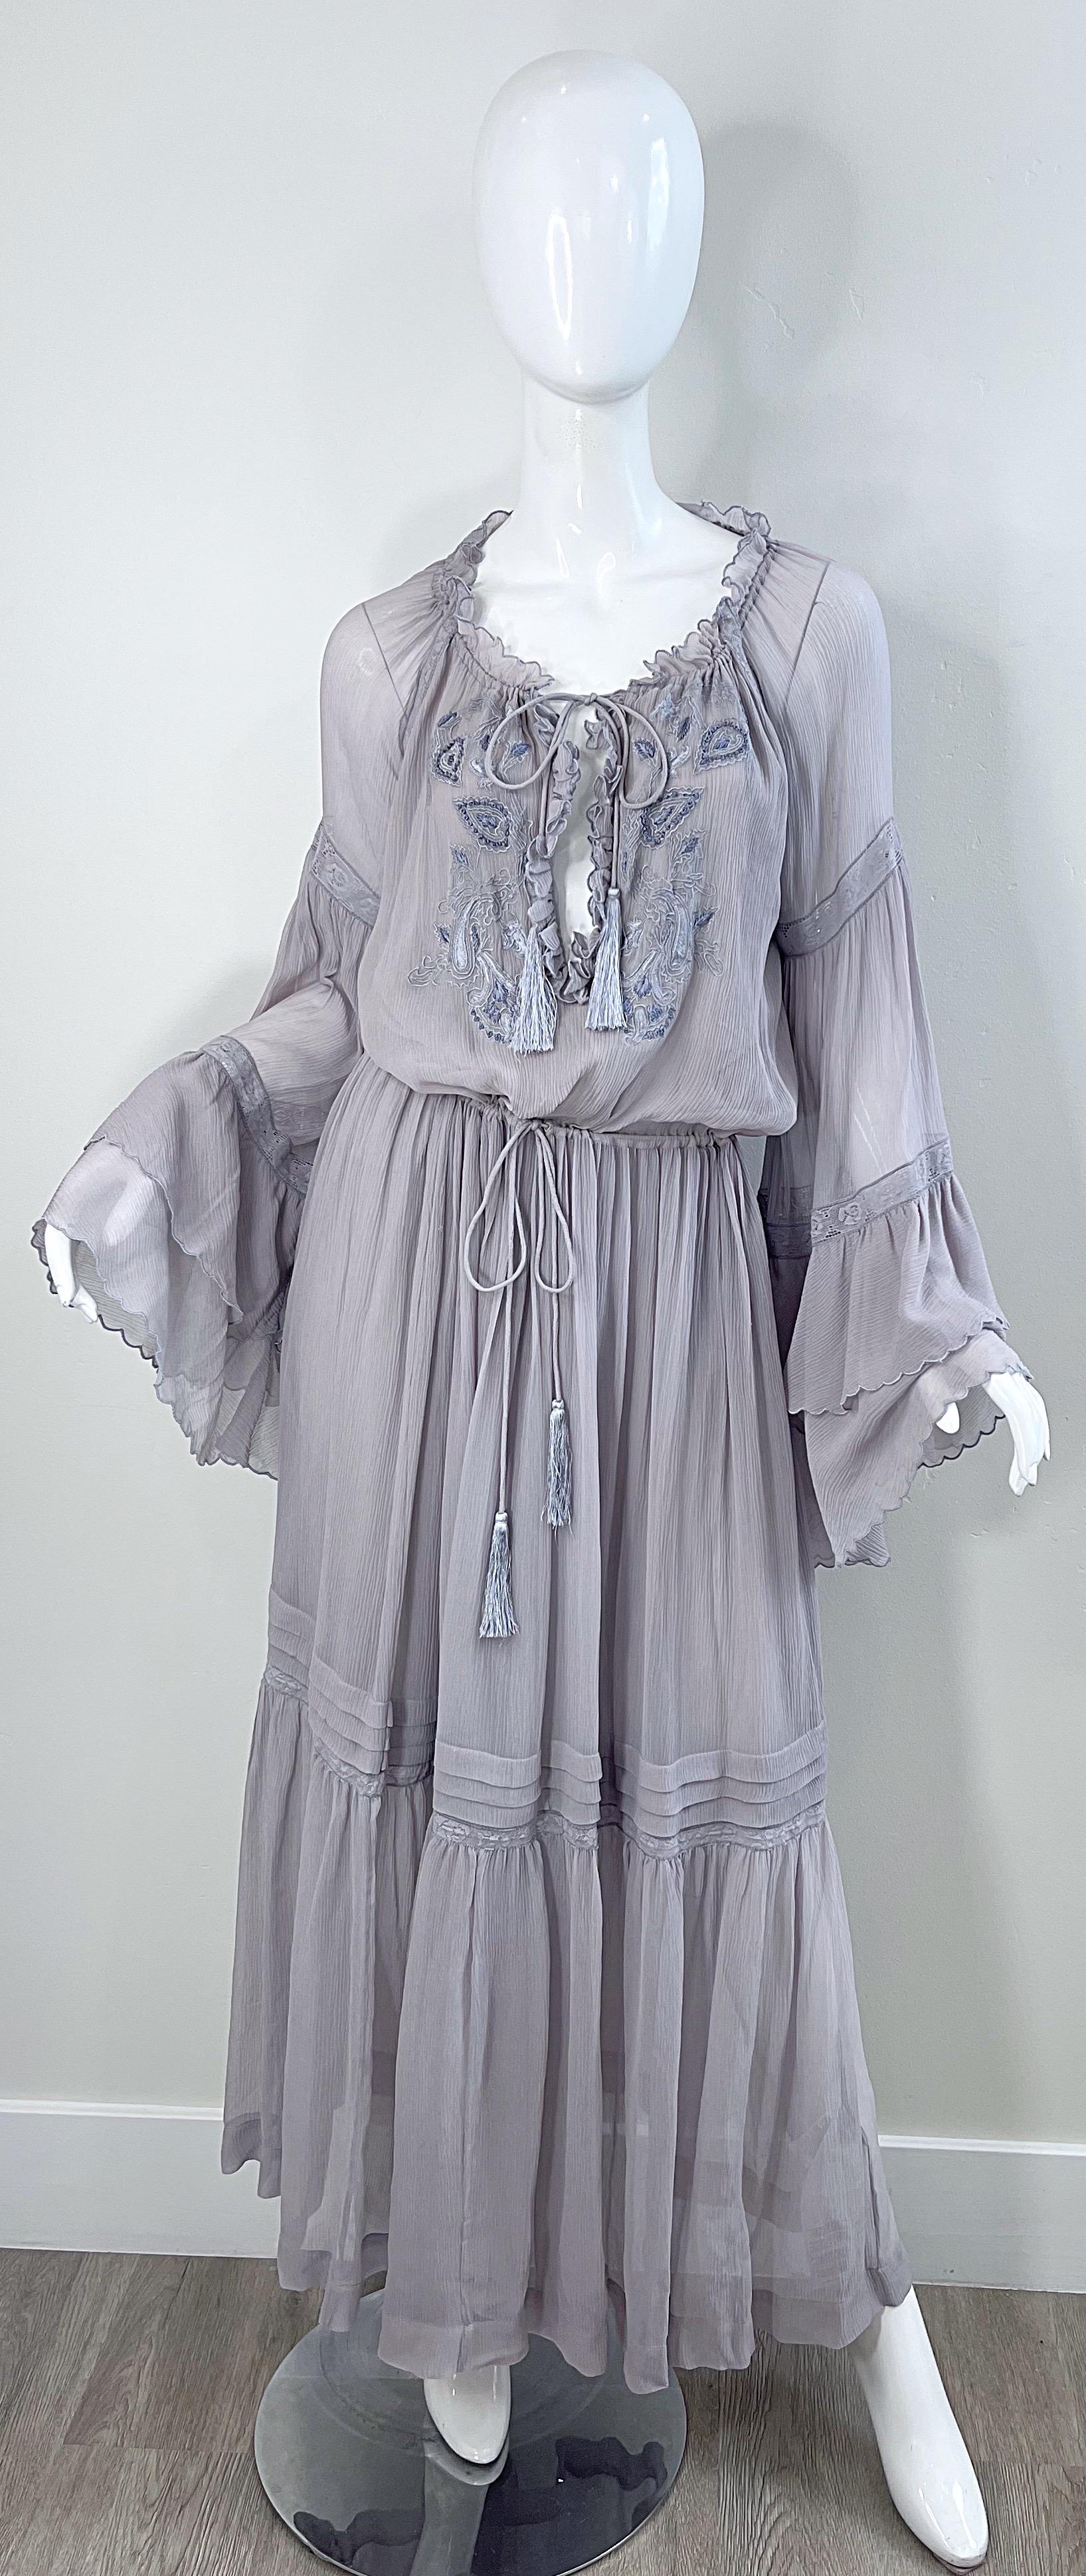 ETRO Resort 2020 Grey Silk Chiffon Gauze 70s Boho Style Bell Sleeve Maxi Dress In Excellent Condition For Sale In San Diego, CA